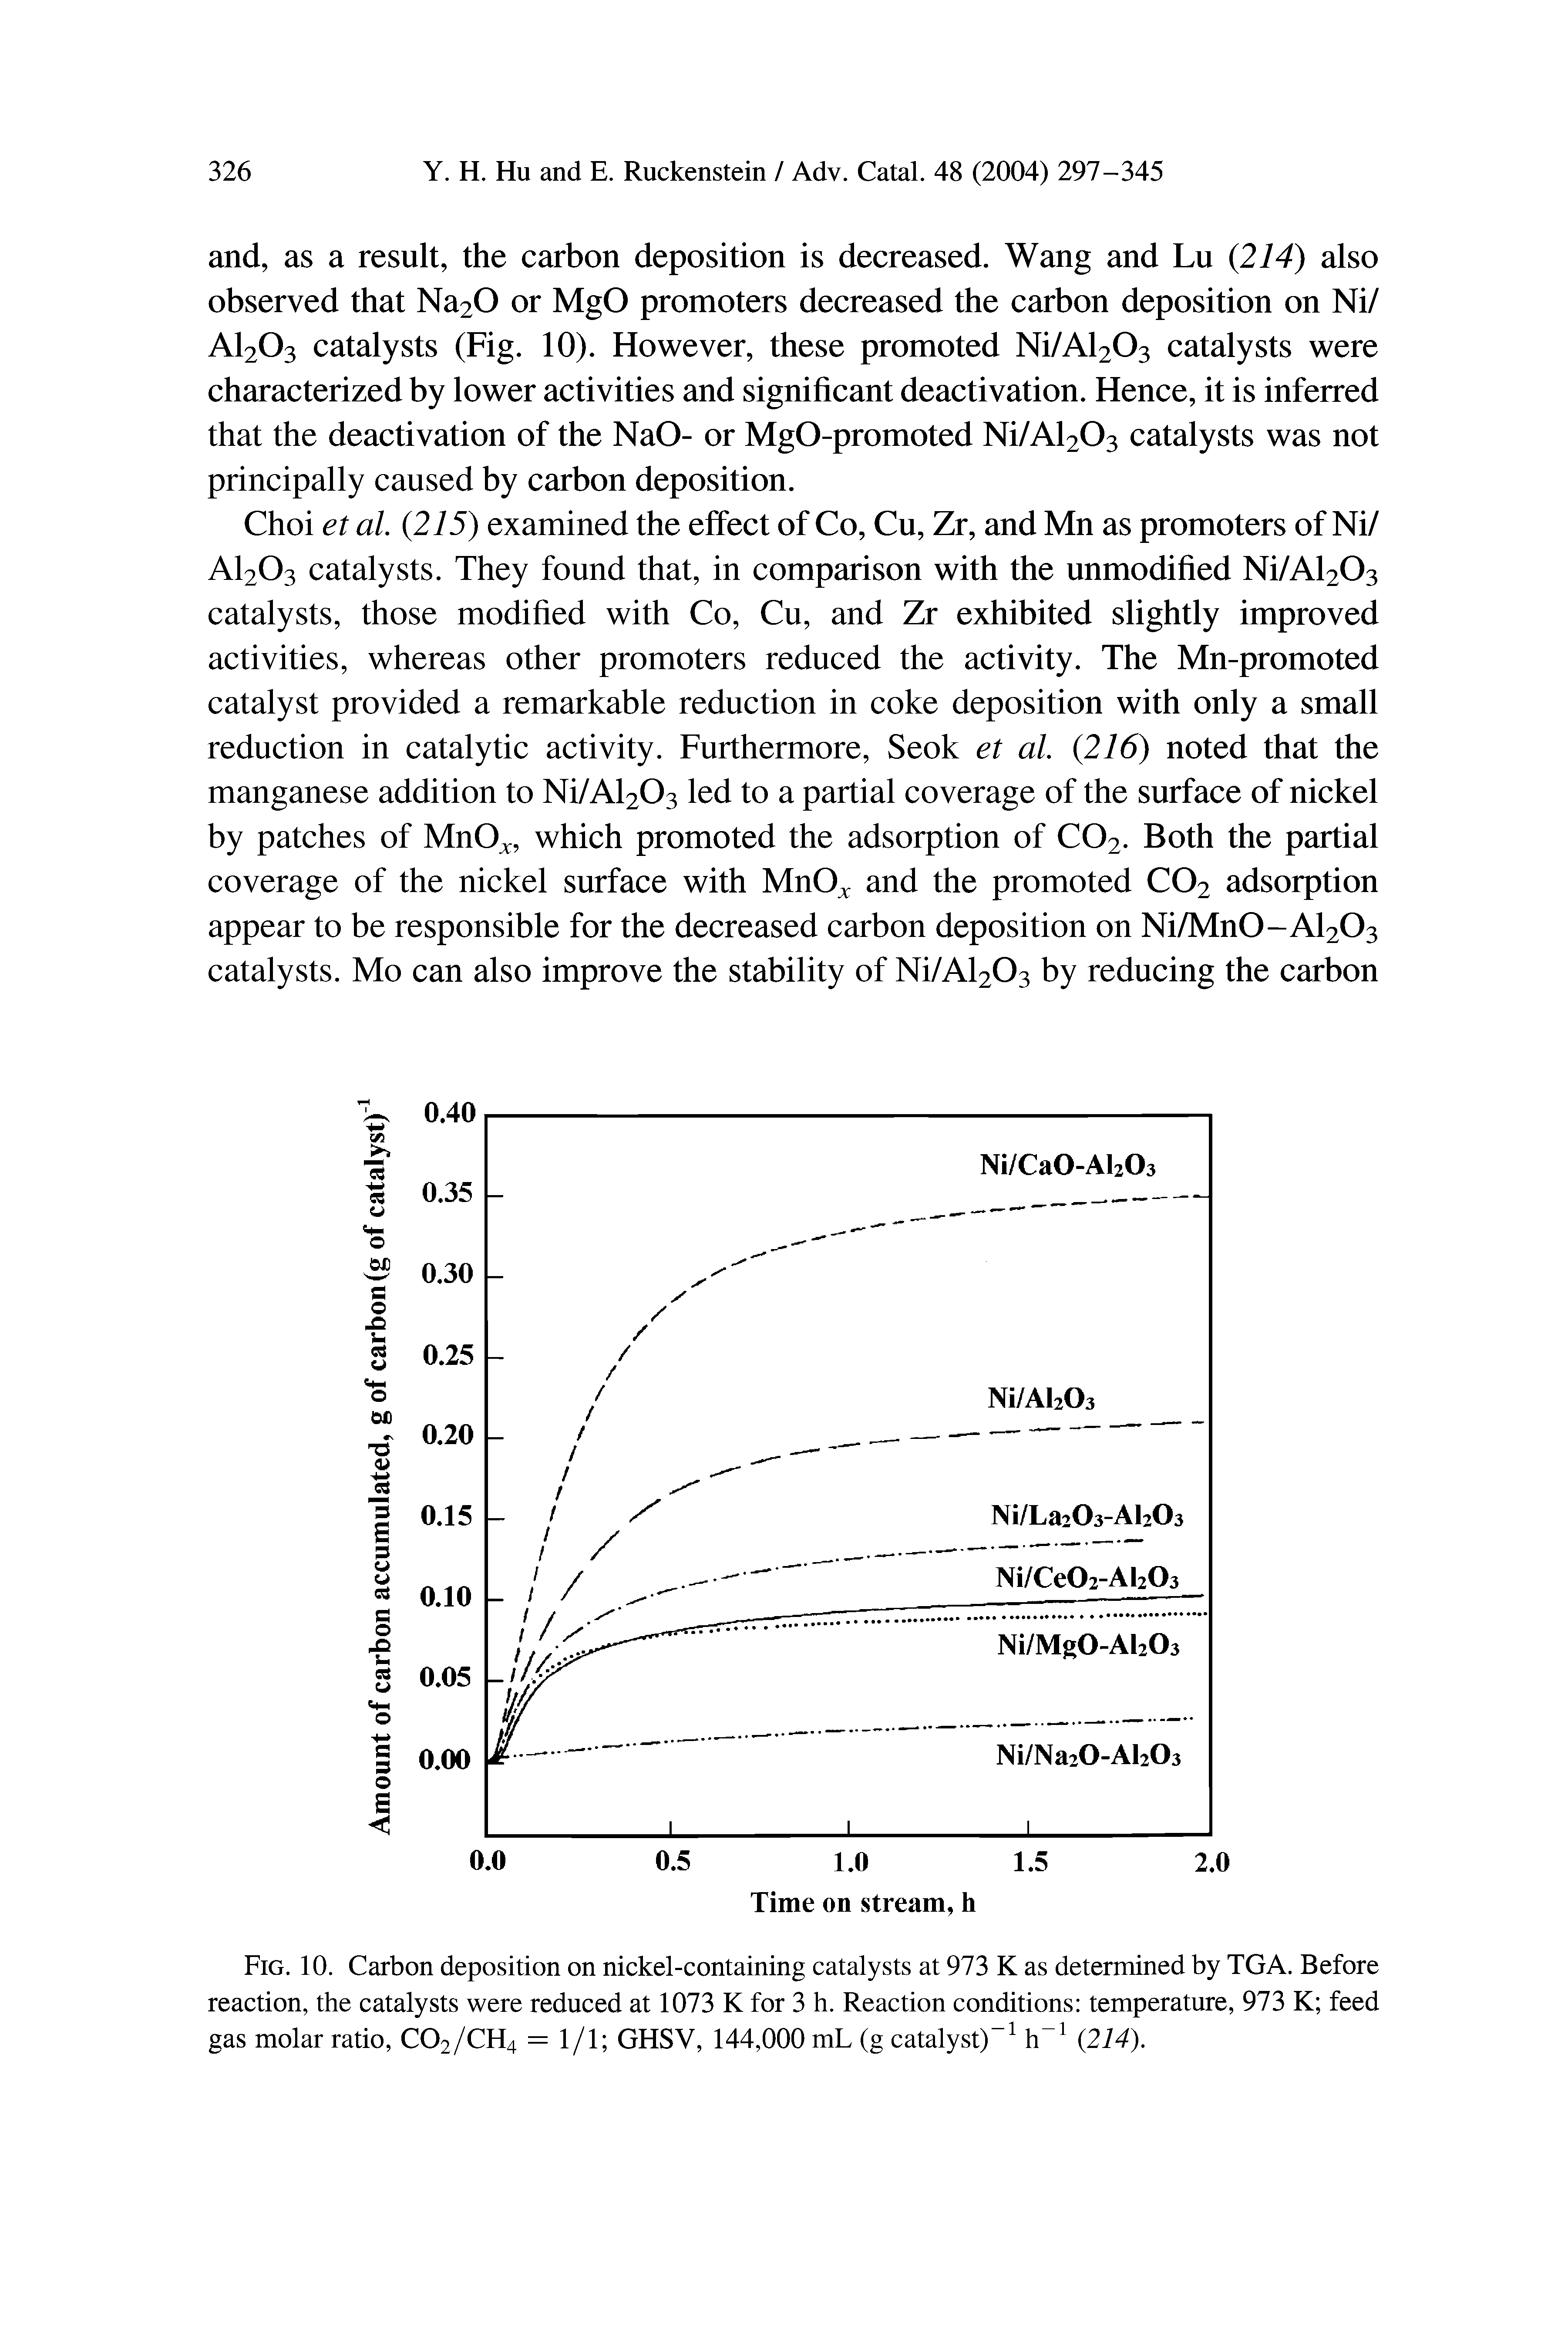 Fig. 10. Carbon deposition on nickel-containing catalysts at 973 K as determined by TGA. Before reaction, the catalysts were reduced at 1073 K for 3 h. Reaction conditions temperature, 973 K feed gas molar ratio, C02/CH4 = 1/1 GHSV, 144,000 mL (g catalyst)-1 h-1 (214).